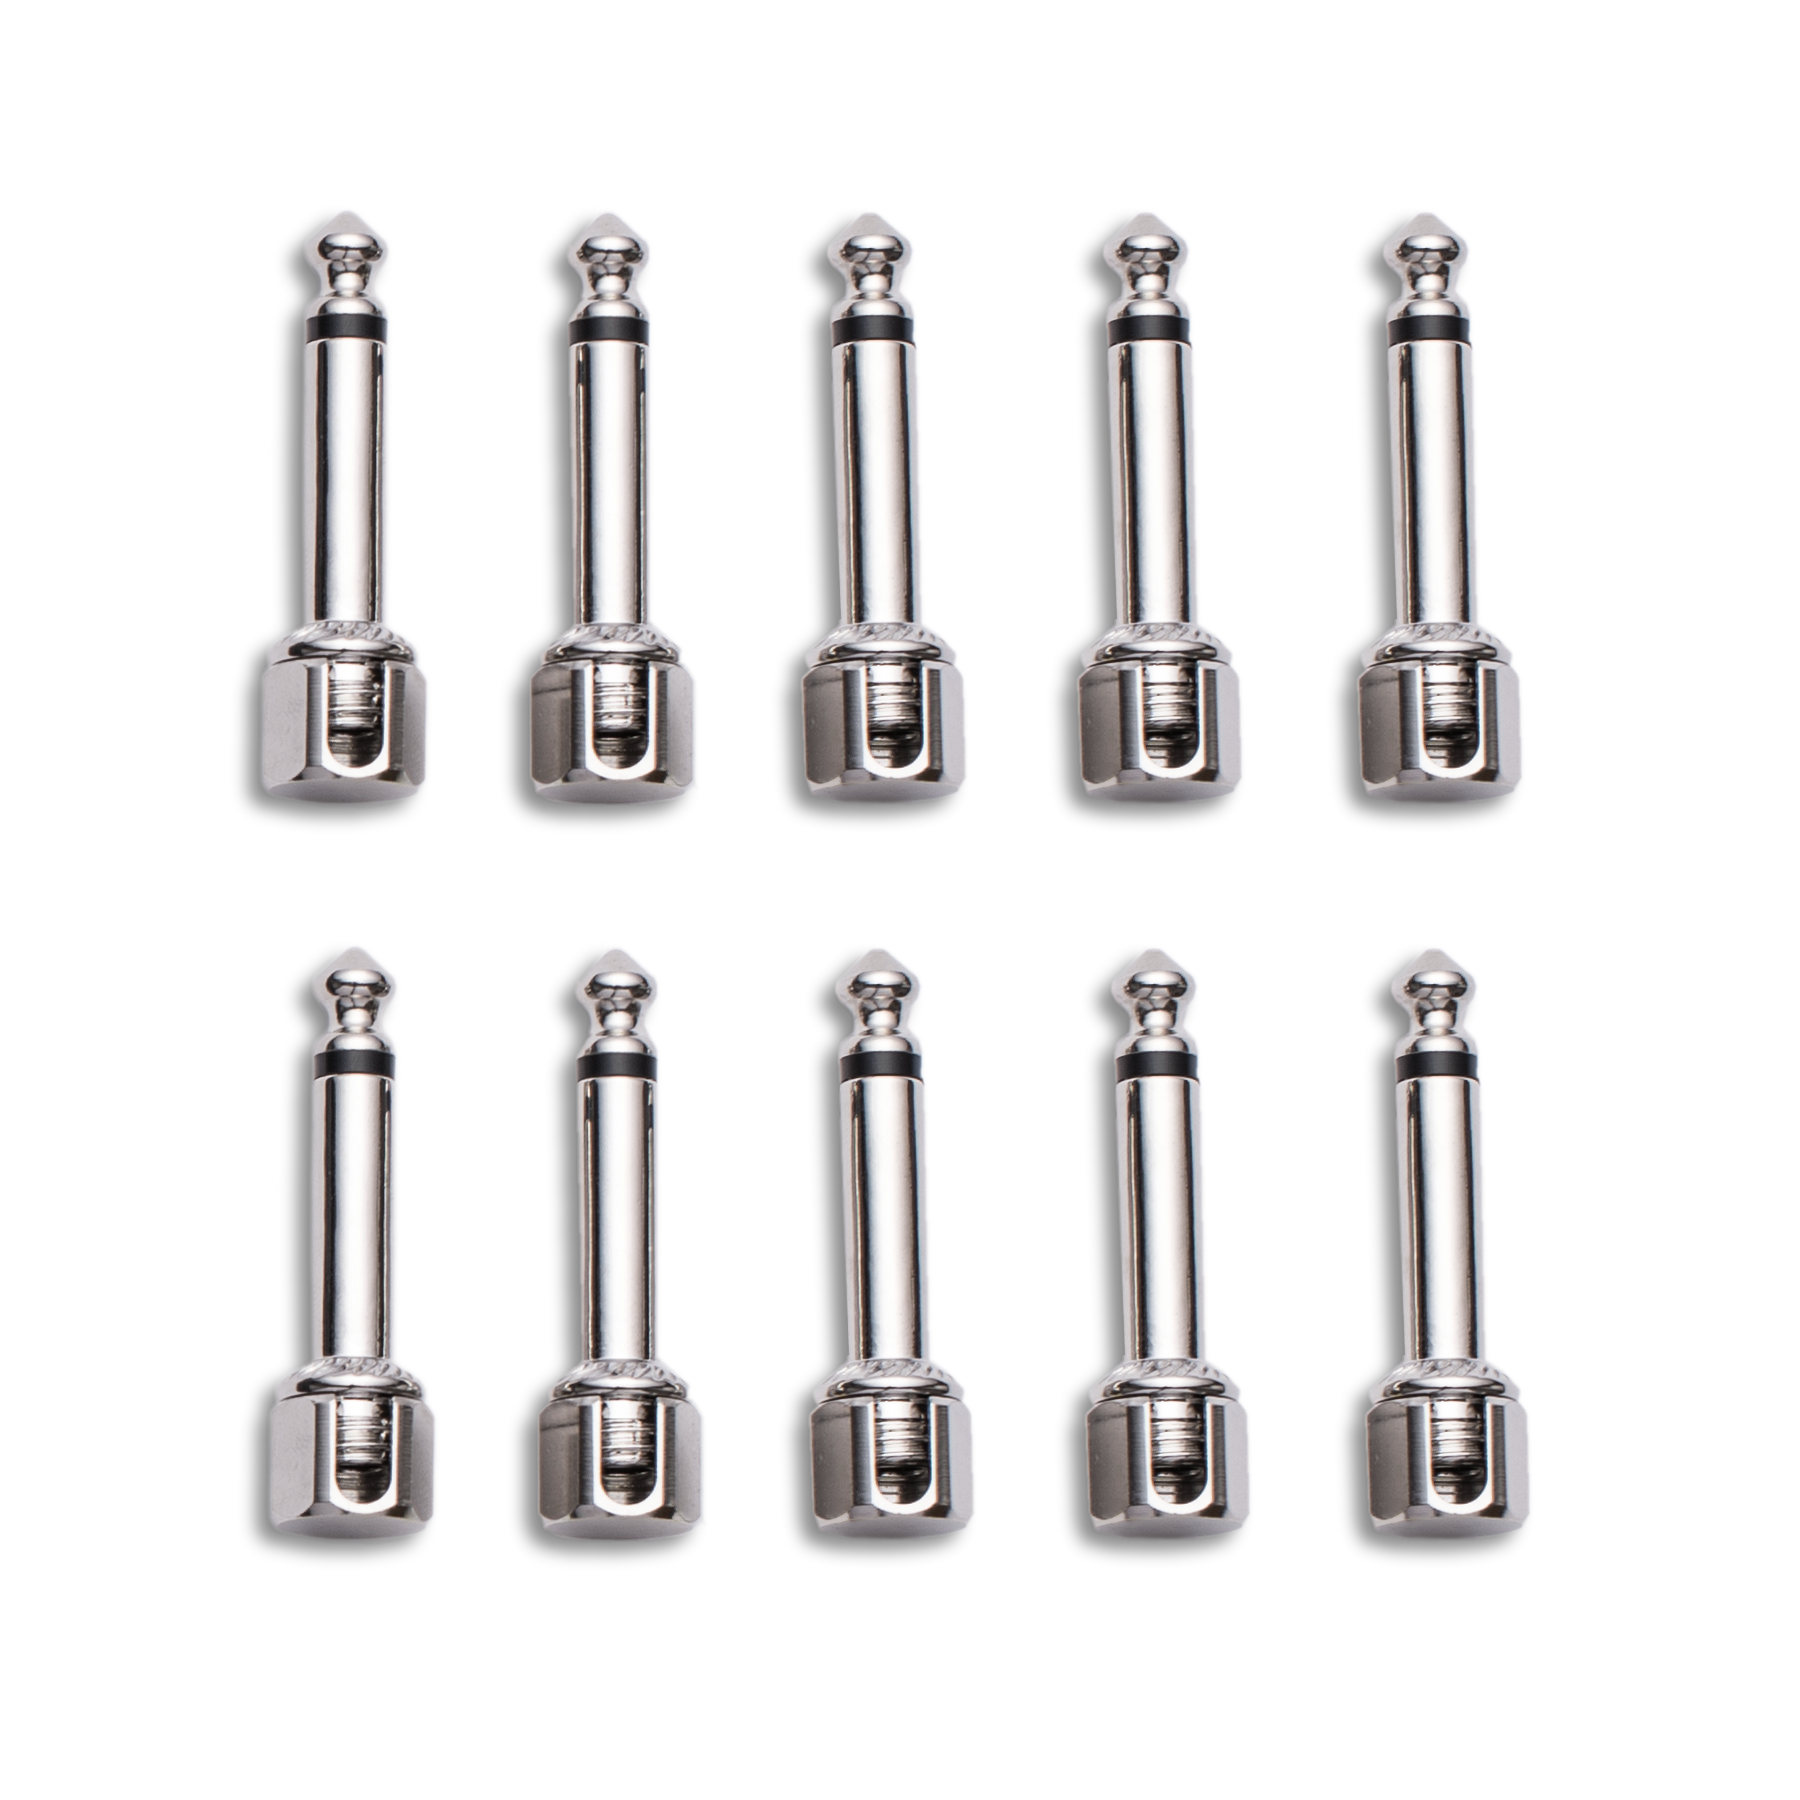 Evidence Audio SiS Right Angled Plugs in Silver. Example Only quantity will vary with kit size